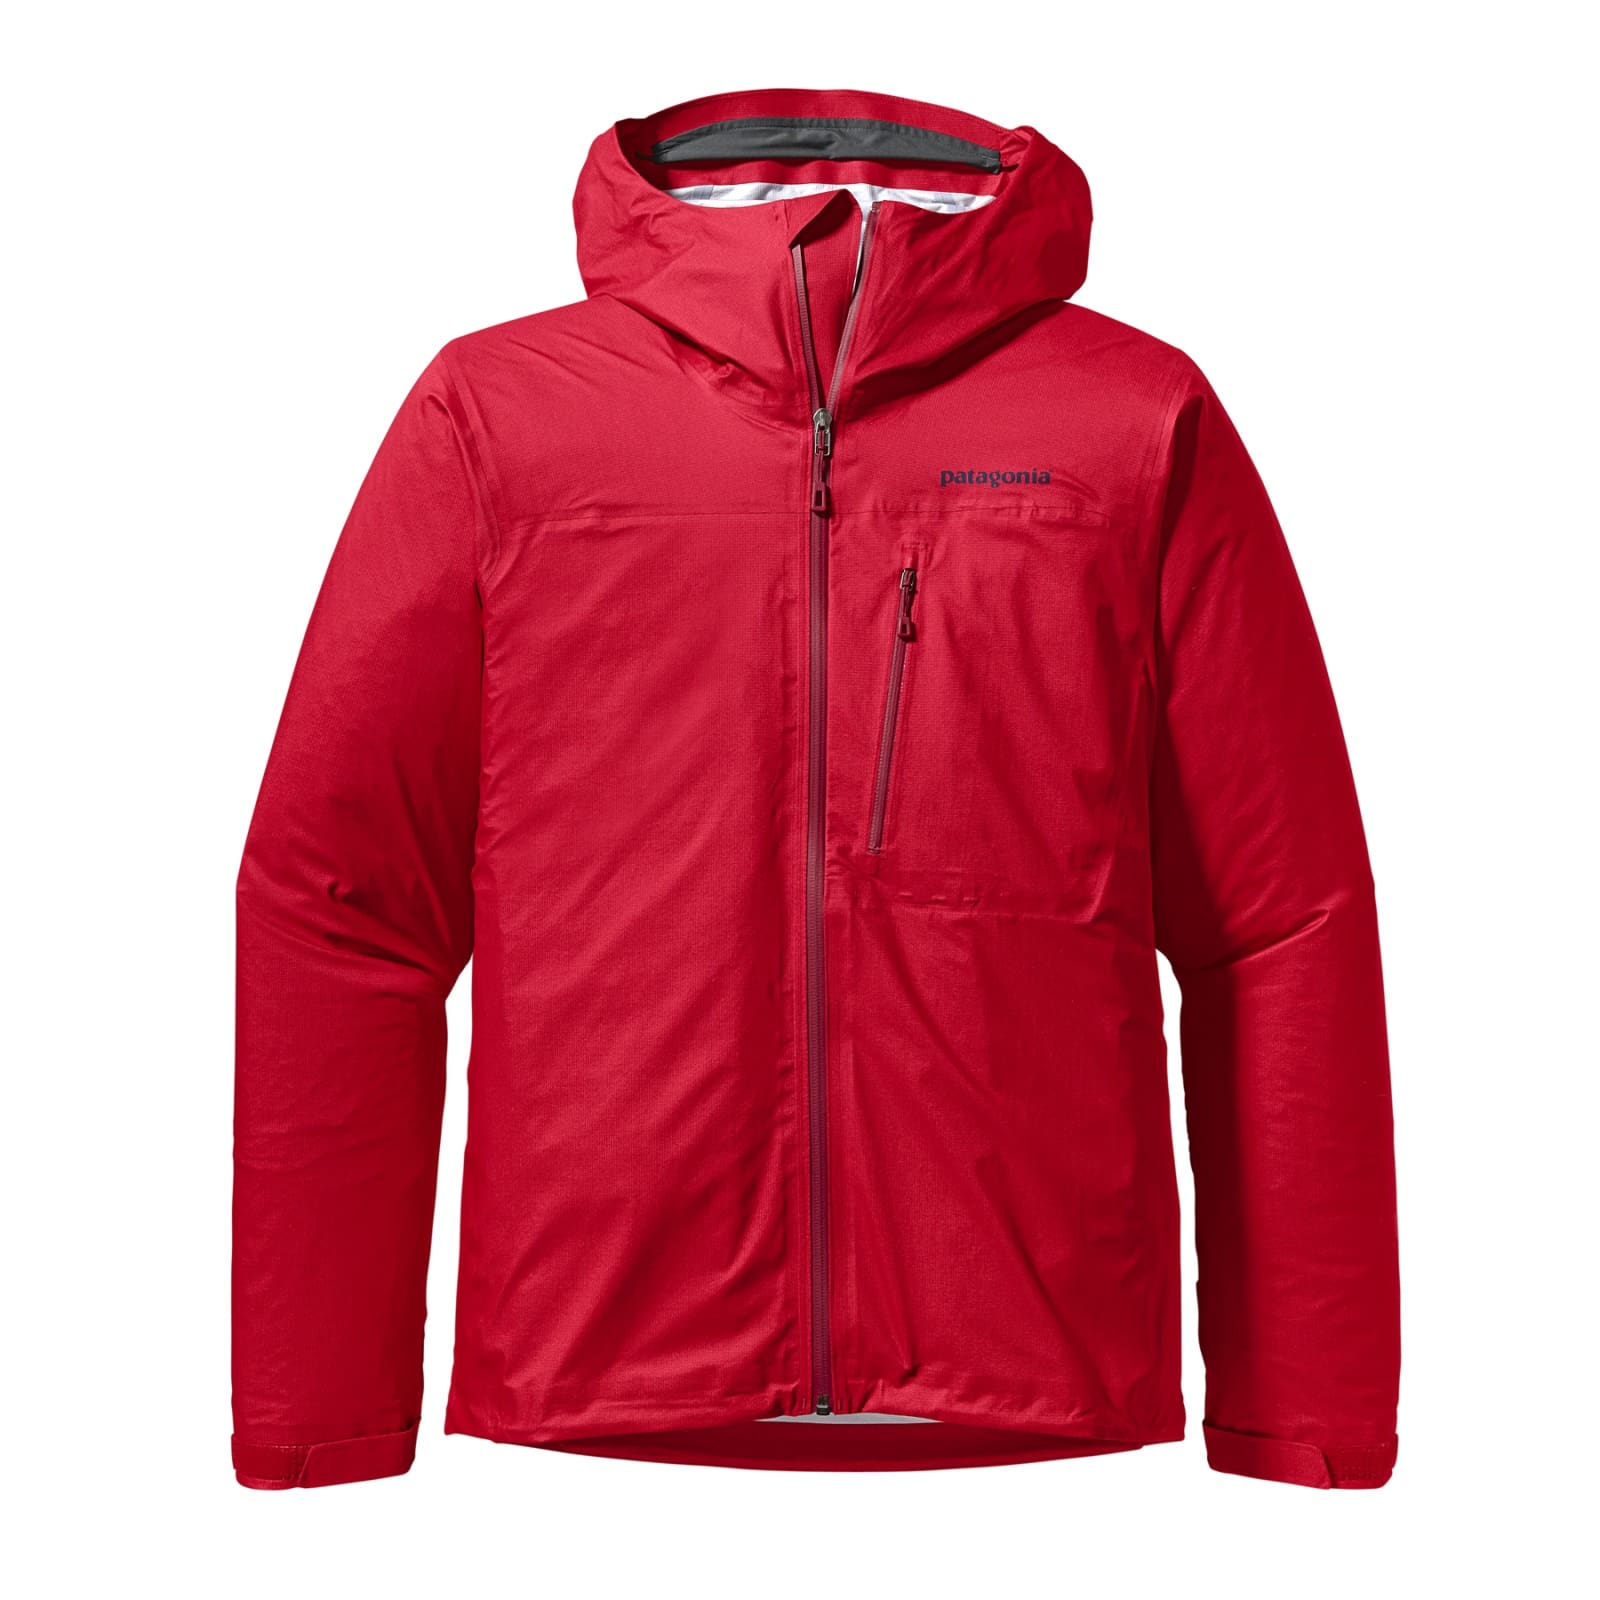 Buy Patagonia Men's M10 Jacket from Outnorth